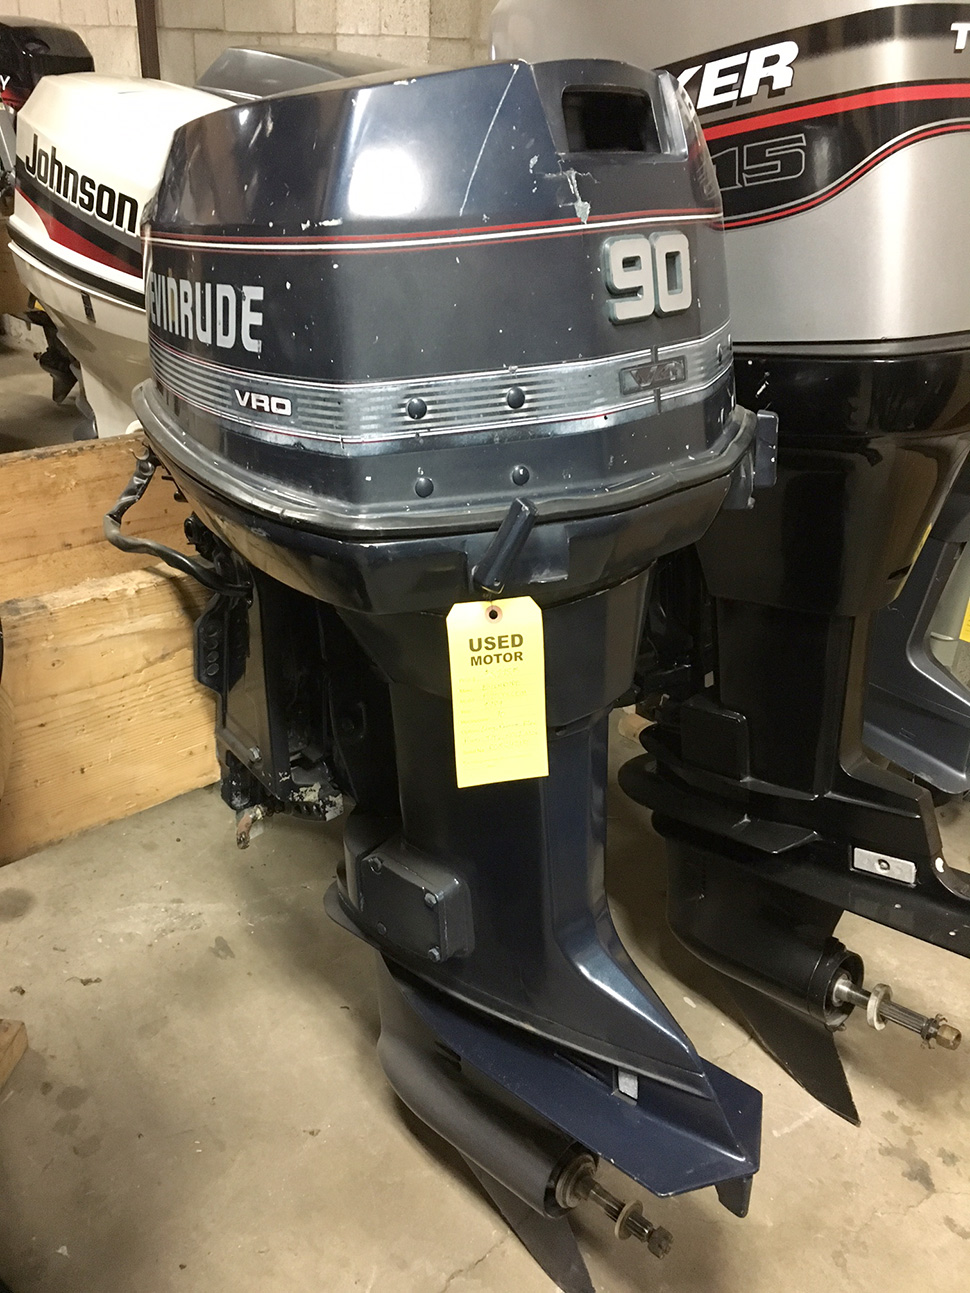 1988 evinrude 9.9 owners manual